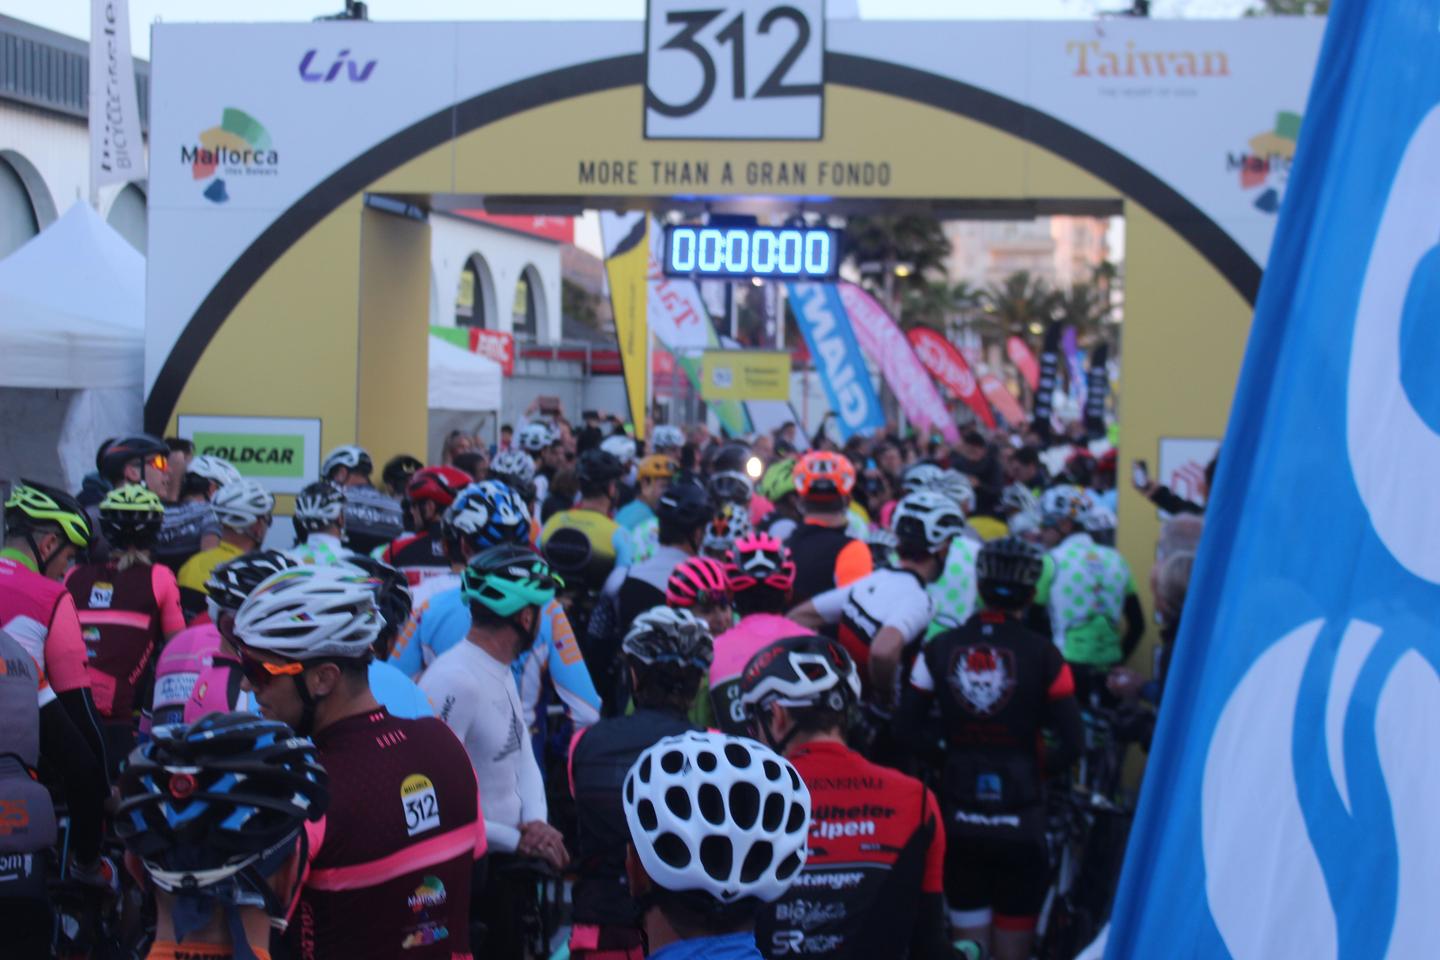 Cyclists gathered at the starting line of the Mallorca 312 race, with a large banner and digital timer displaying 00:00:00.